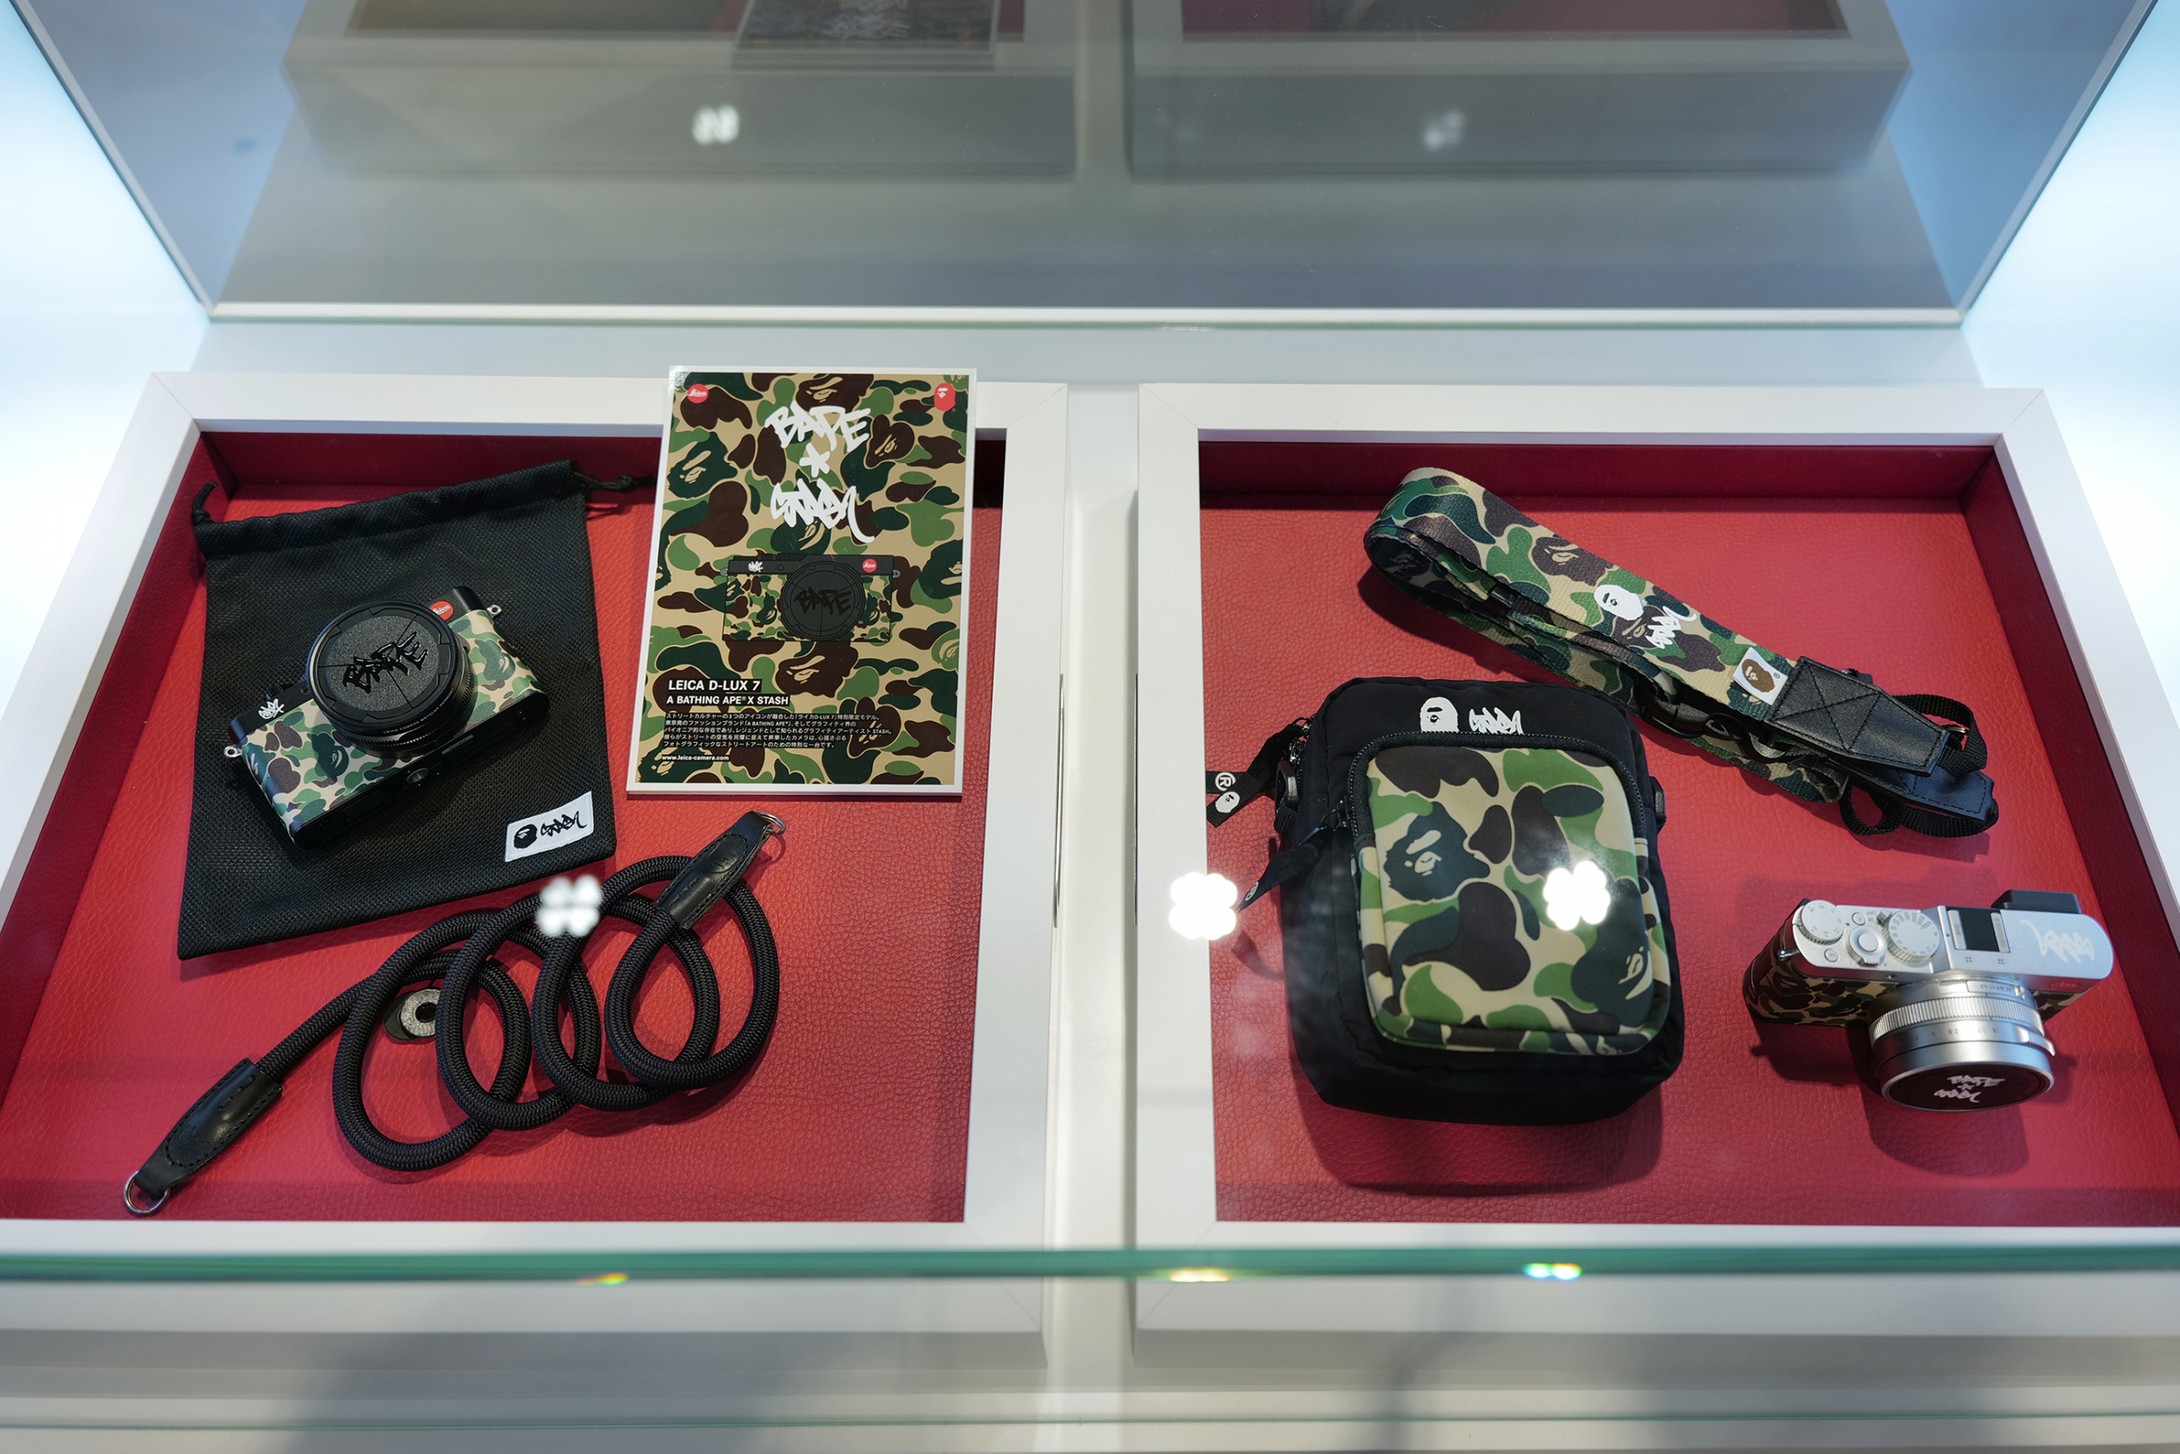 Leica Takes To The Streets With New D-Lux 7 'Bathing Ape x Stash' Collab